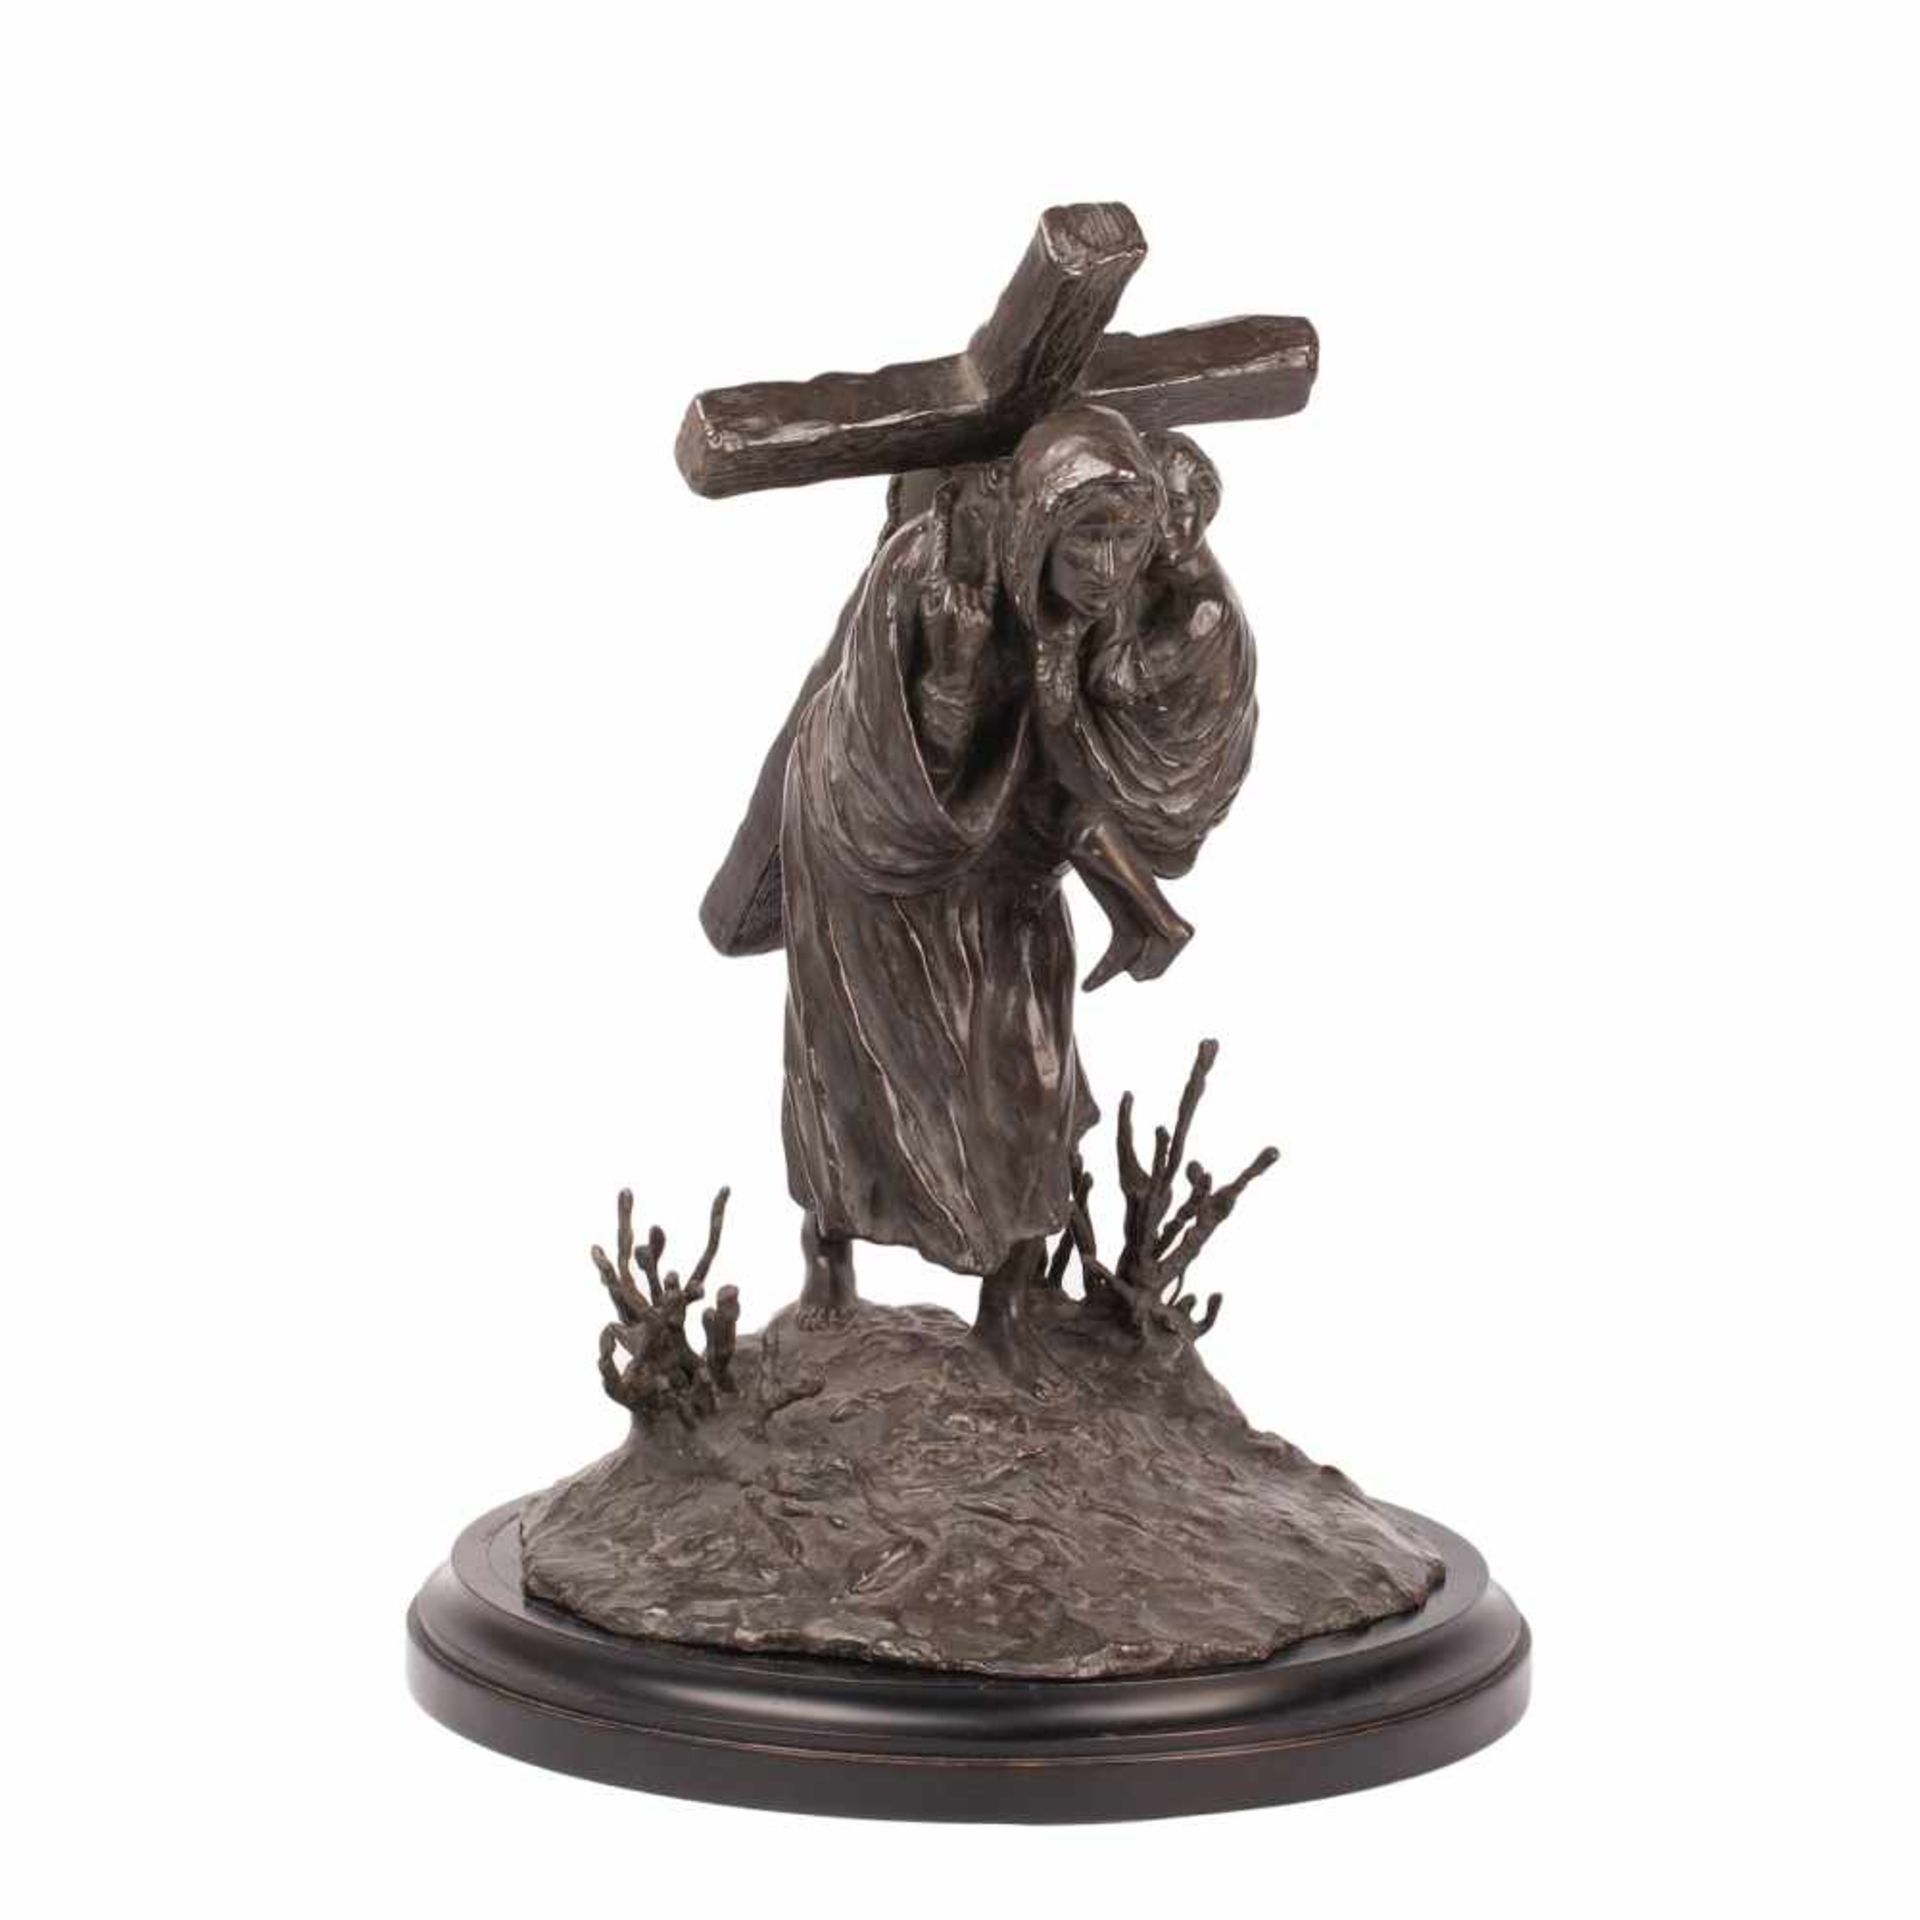 Extremely rare Russian bronze compositionExtremely rare Russian bronze composition "Heavy Cross".